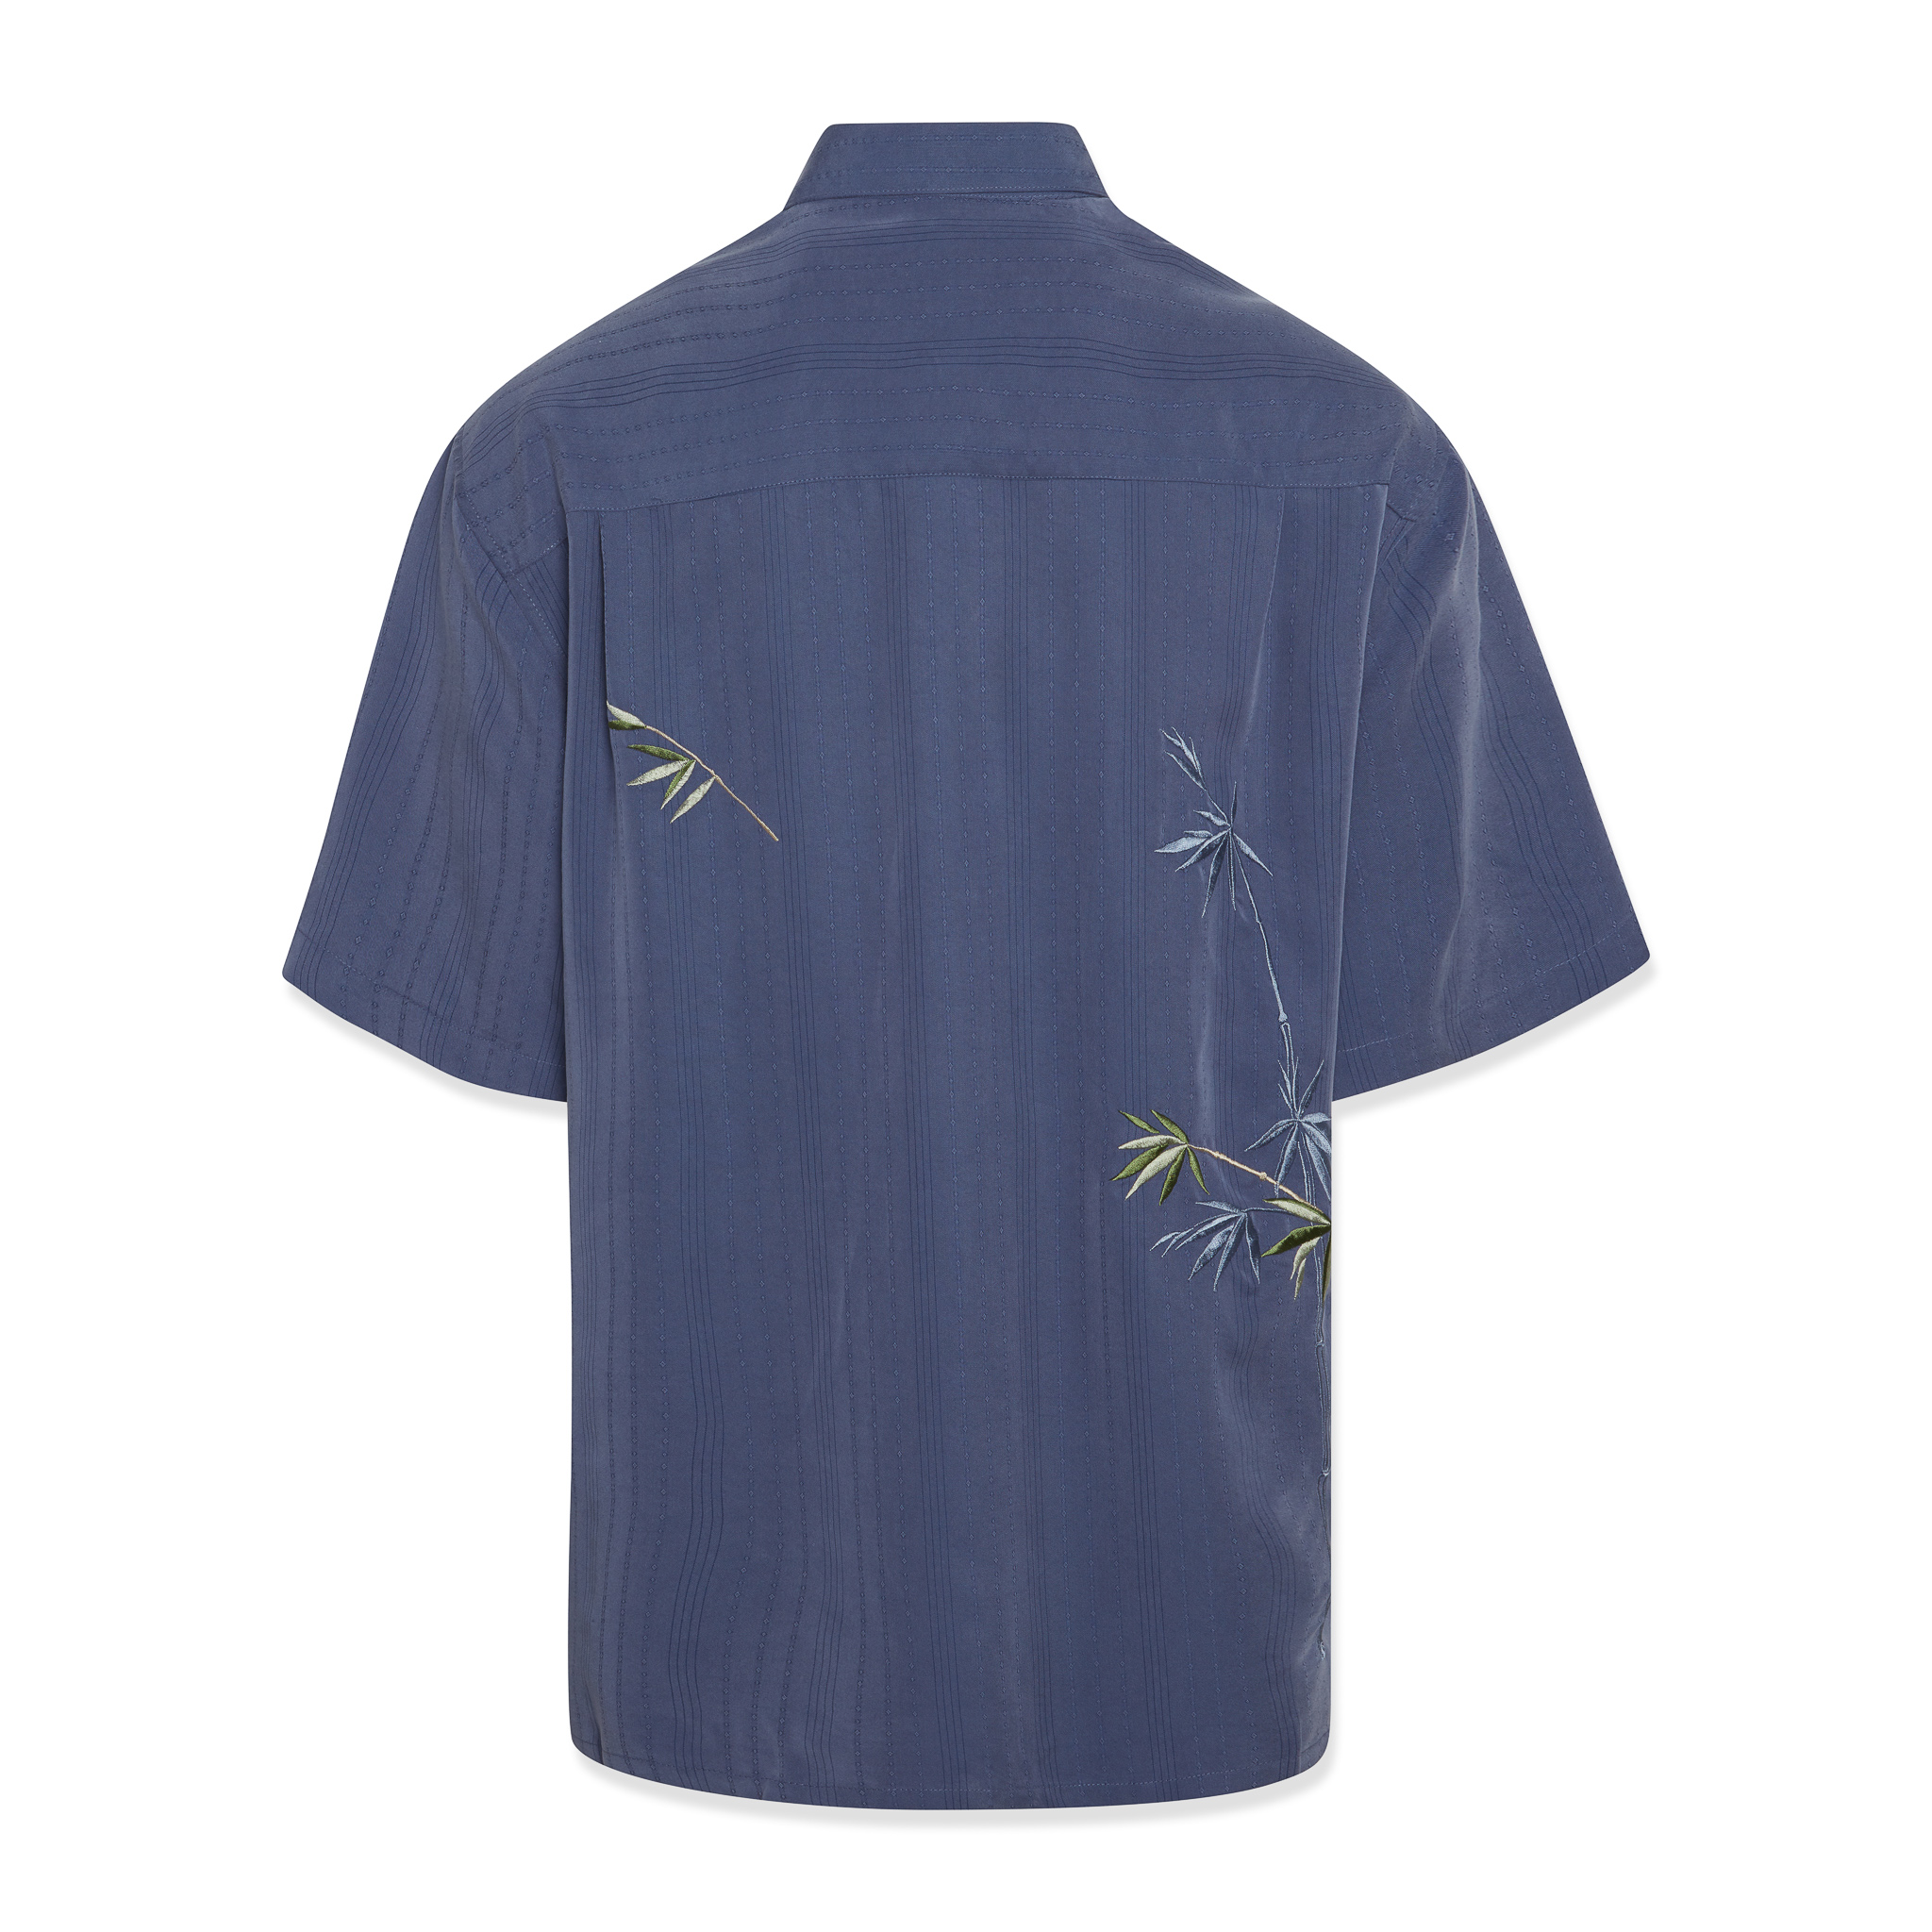 bamboo cay flying bamboos embroidered shirt